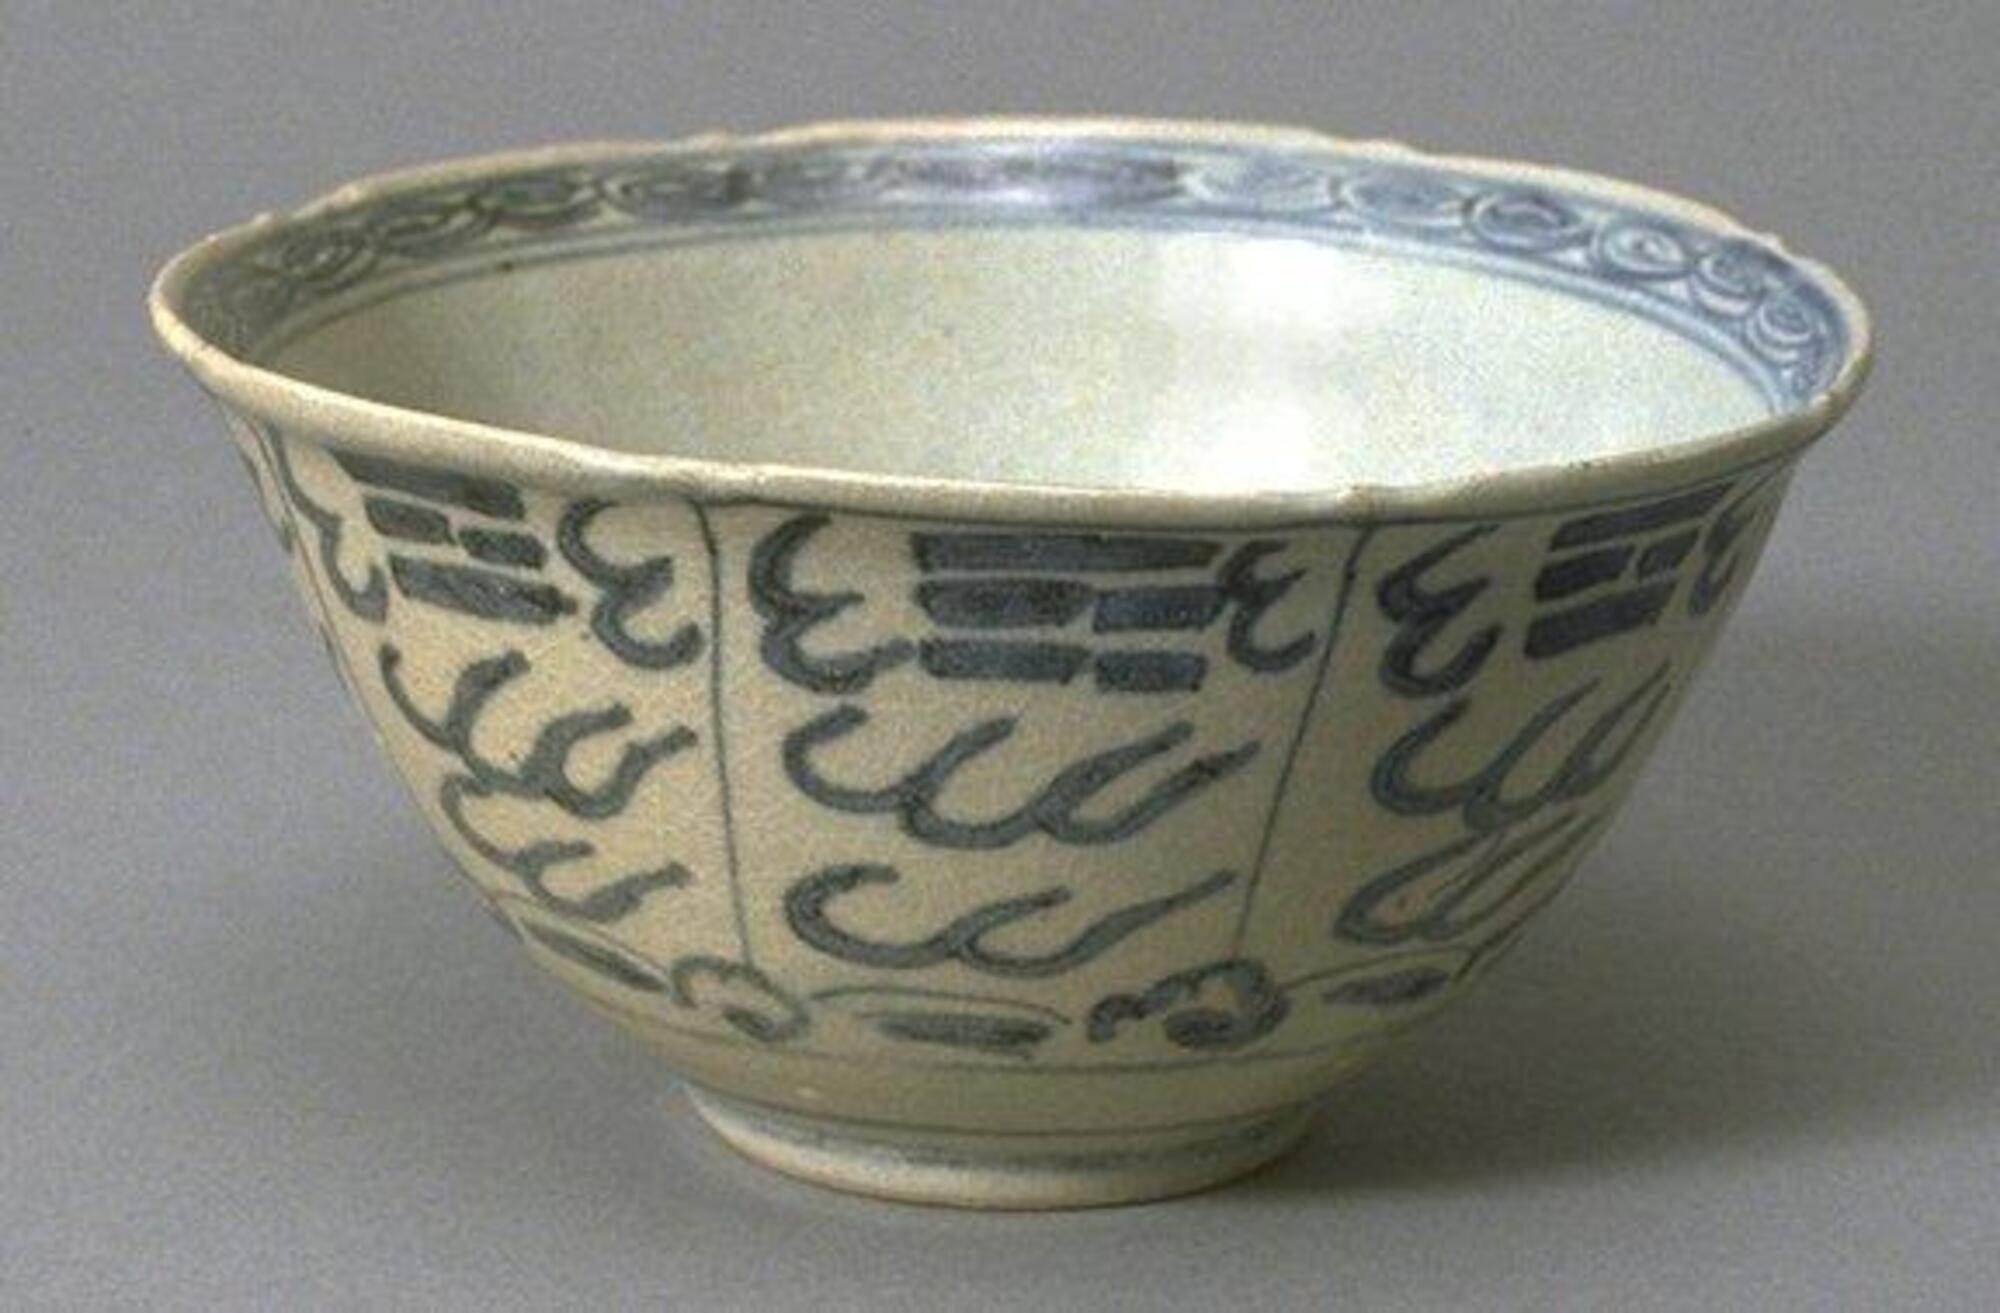 A small hemispherical bowl with everted rim on a straight footring, decorated with underglaze cobalt blue. The exterior depicts the <em>bagua, </em>or eight trigrams of the I Ching, around the rim, surrounded by stylized clouds with silk-worm pattern band around the interior rim. The bowl is covered in a clear glaze. 